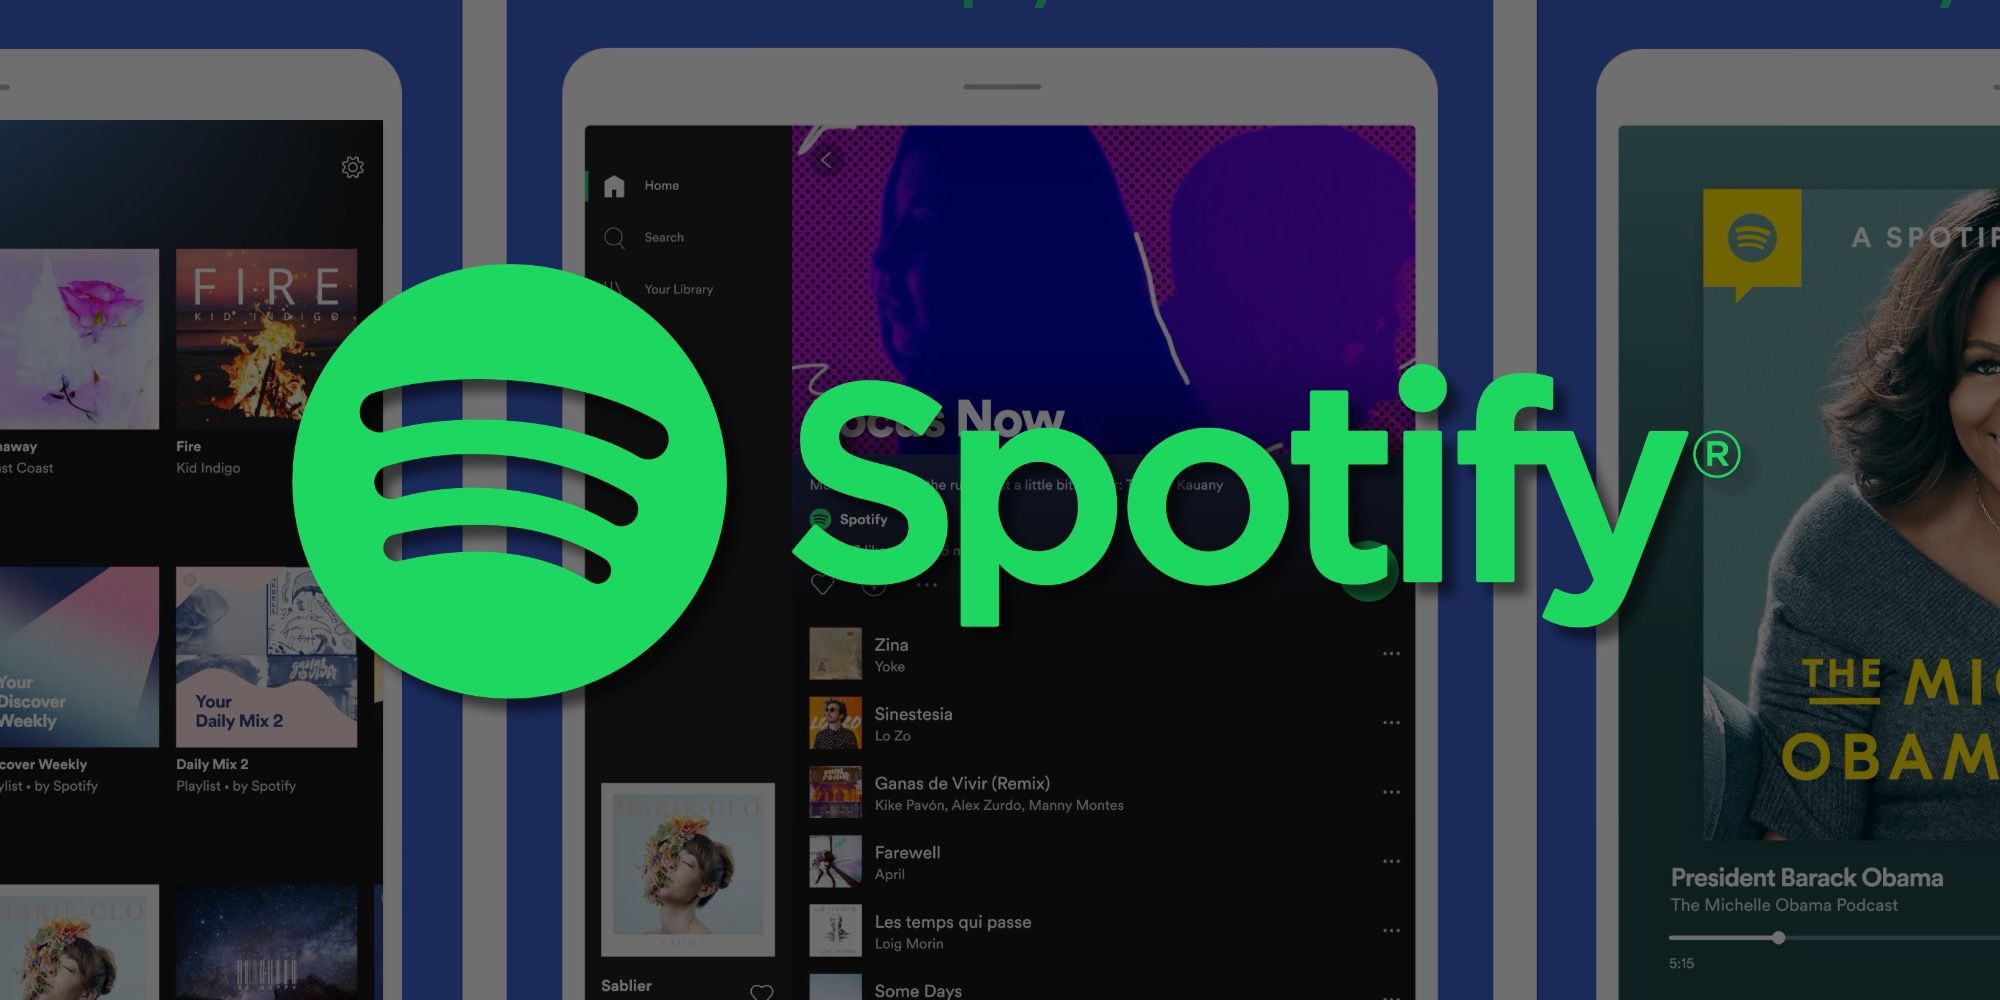 Spotify for Apple devices